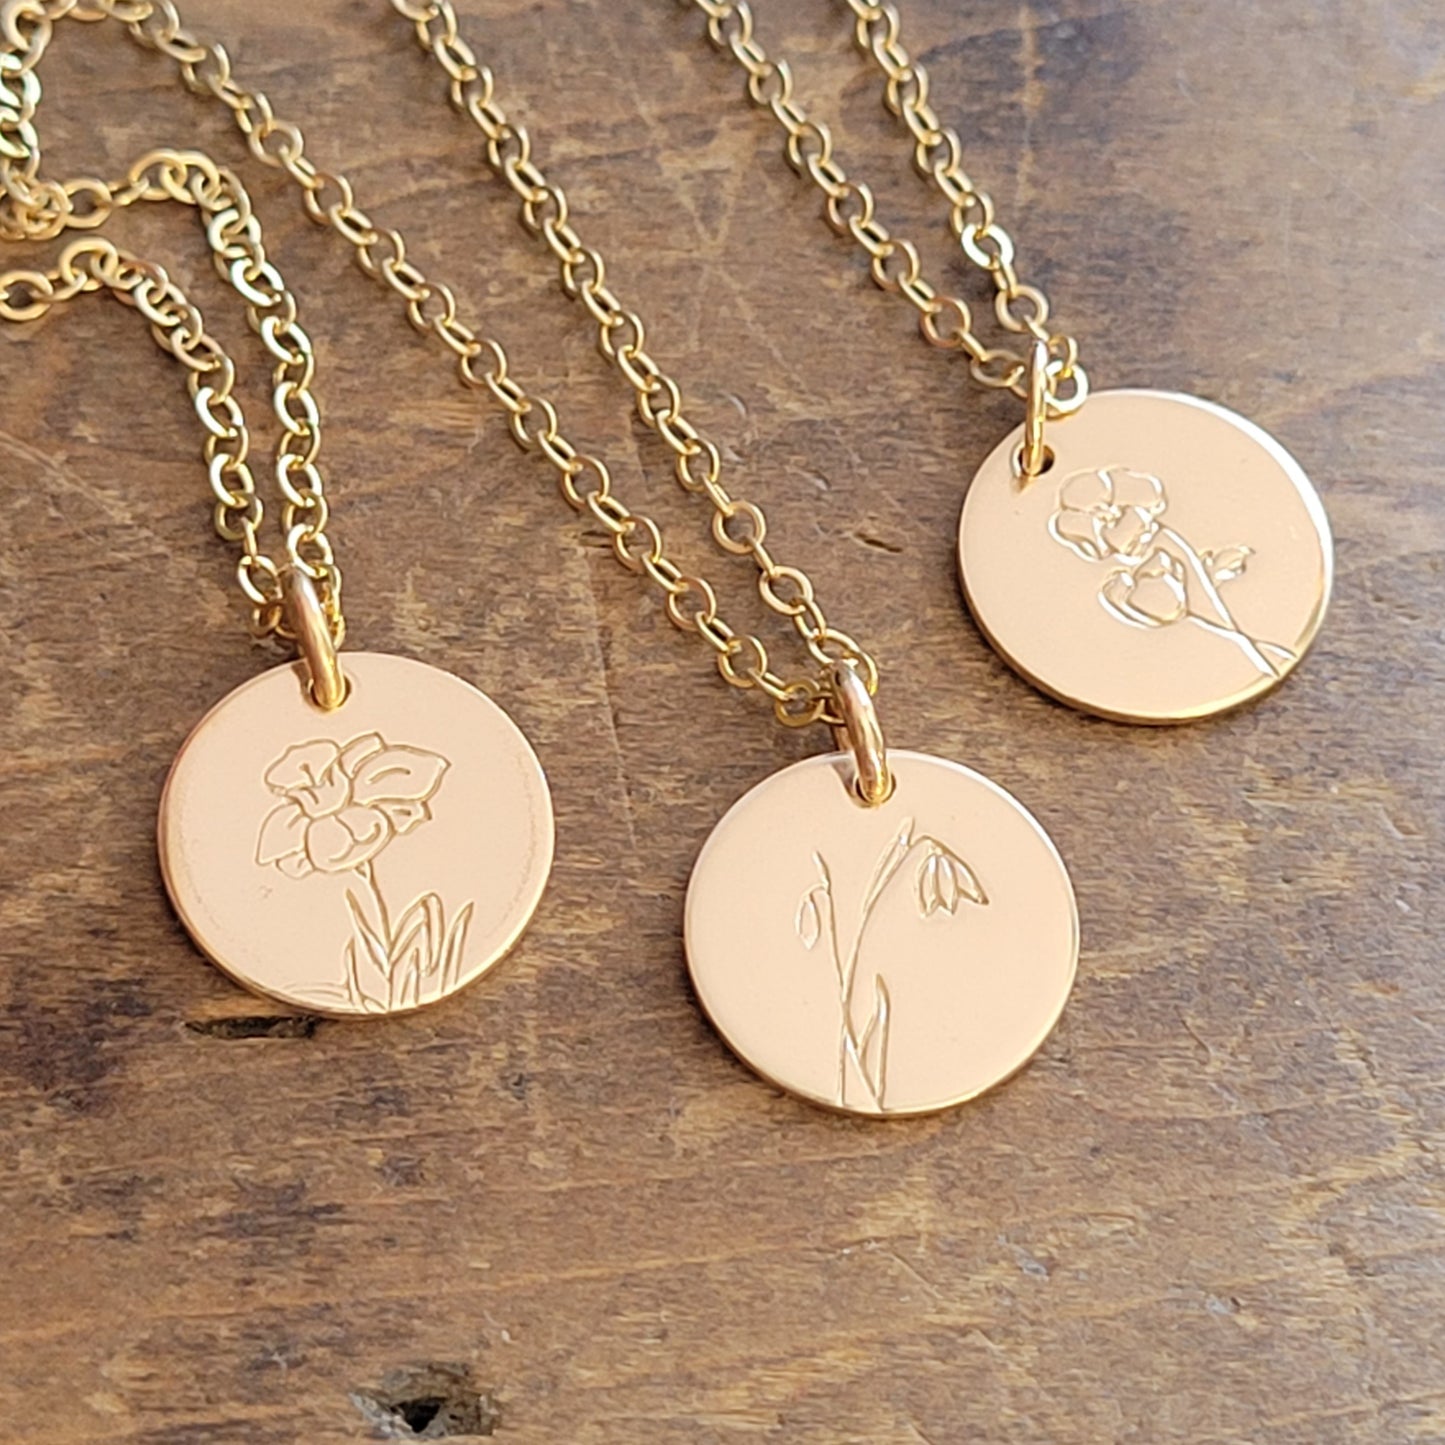 Birth Flower Necklace . SINGLE Floral Disc Necklace .YELLOW GOLD-FILLED